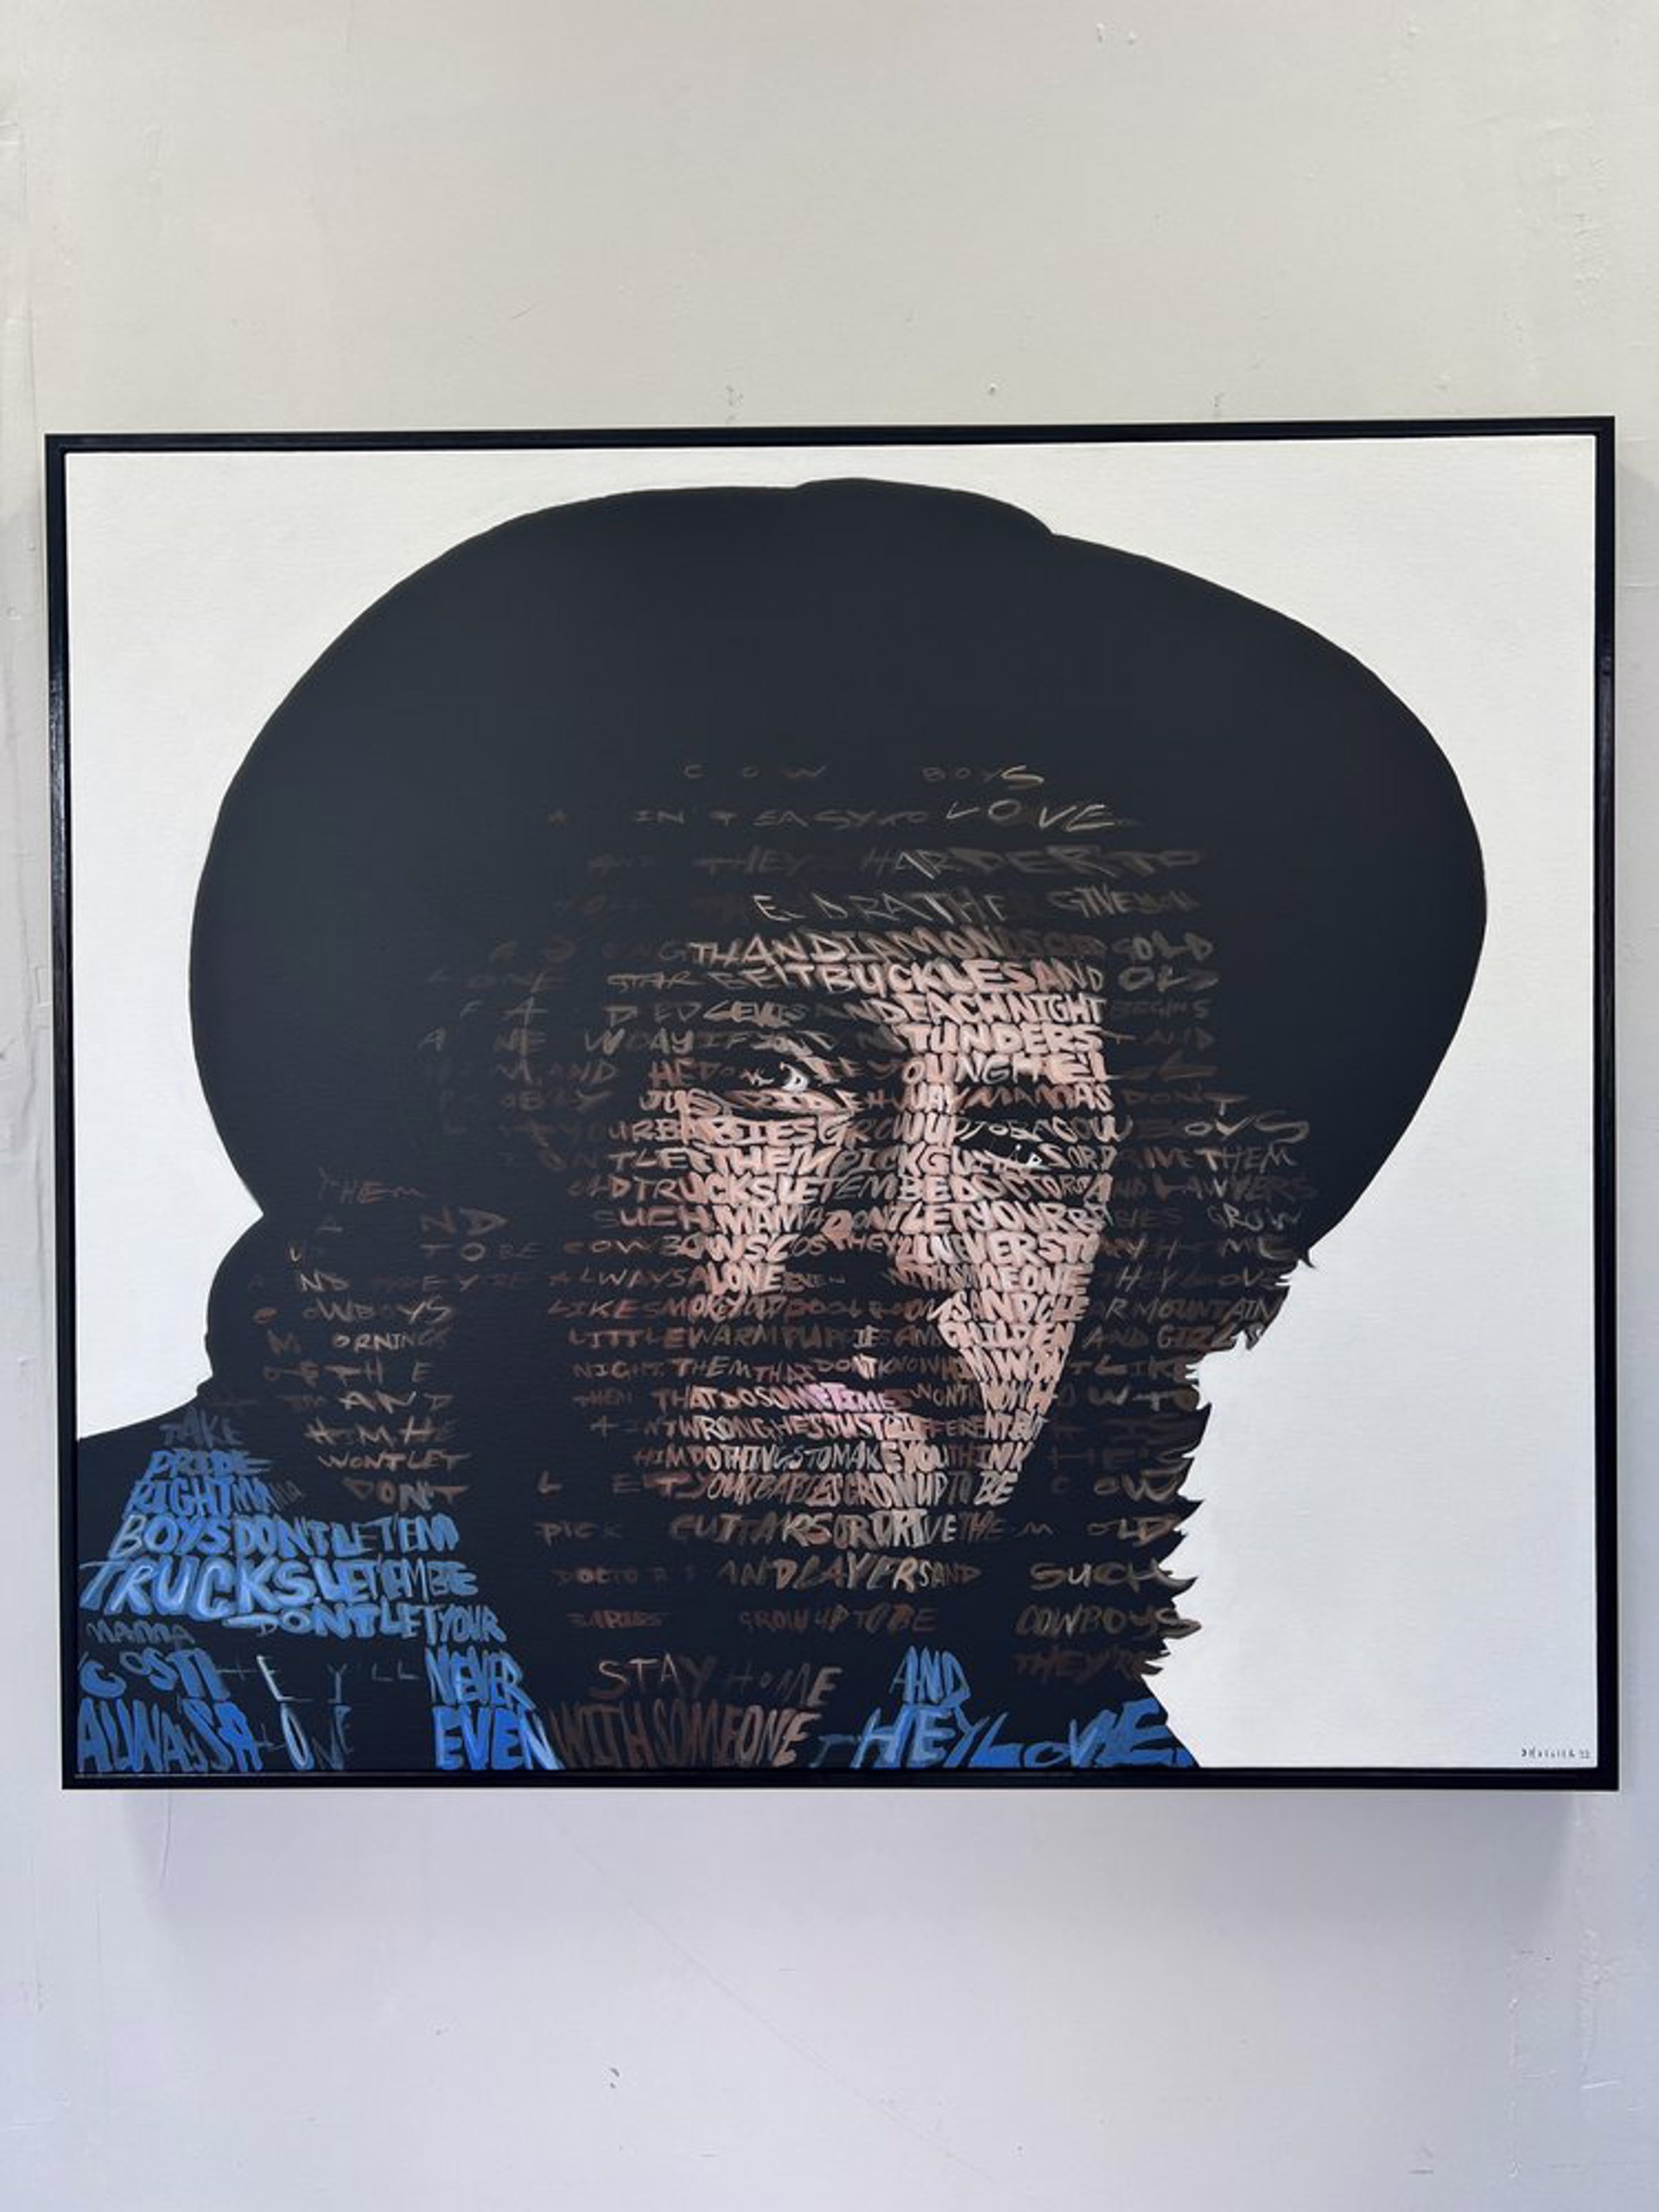 Waylon Jennings (Text: Mammas Don't Let Your Babies Grow Up to be Cowboys) by David Hollier